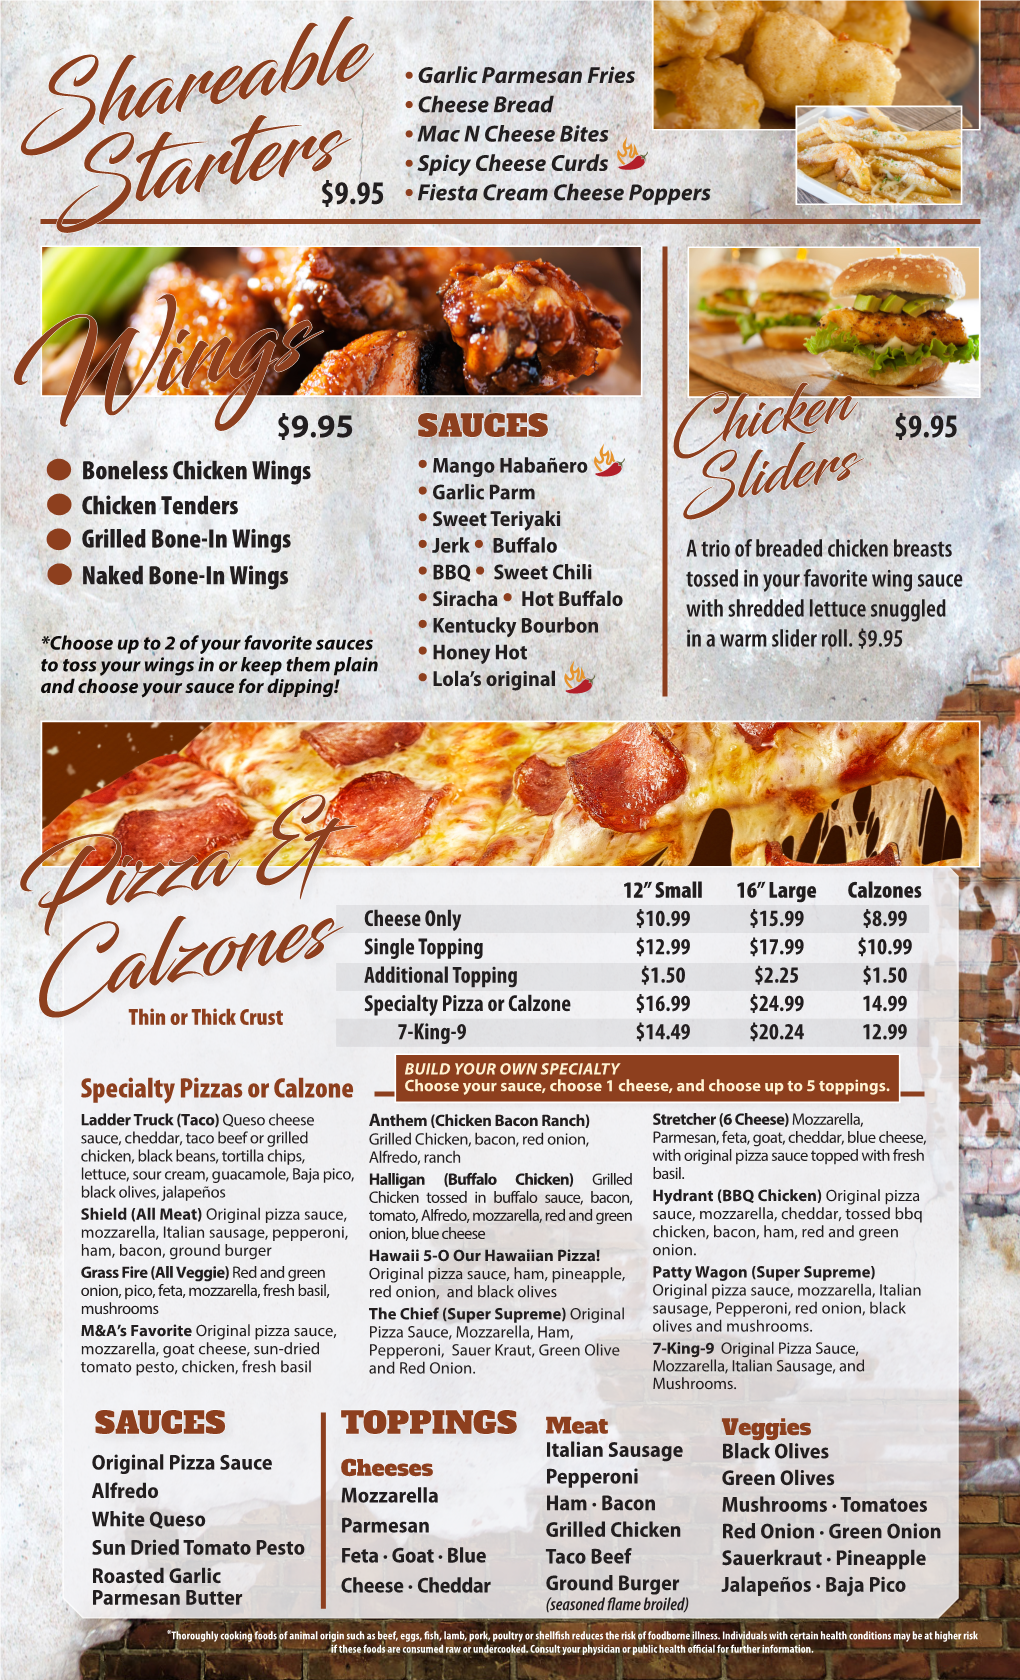 Shareable Pizza & Calzones Starters